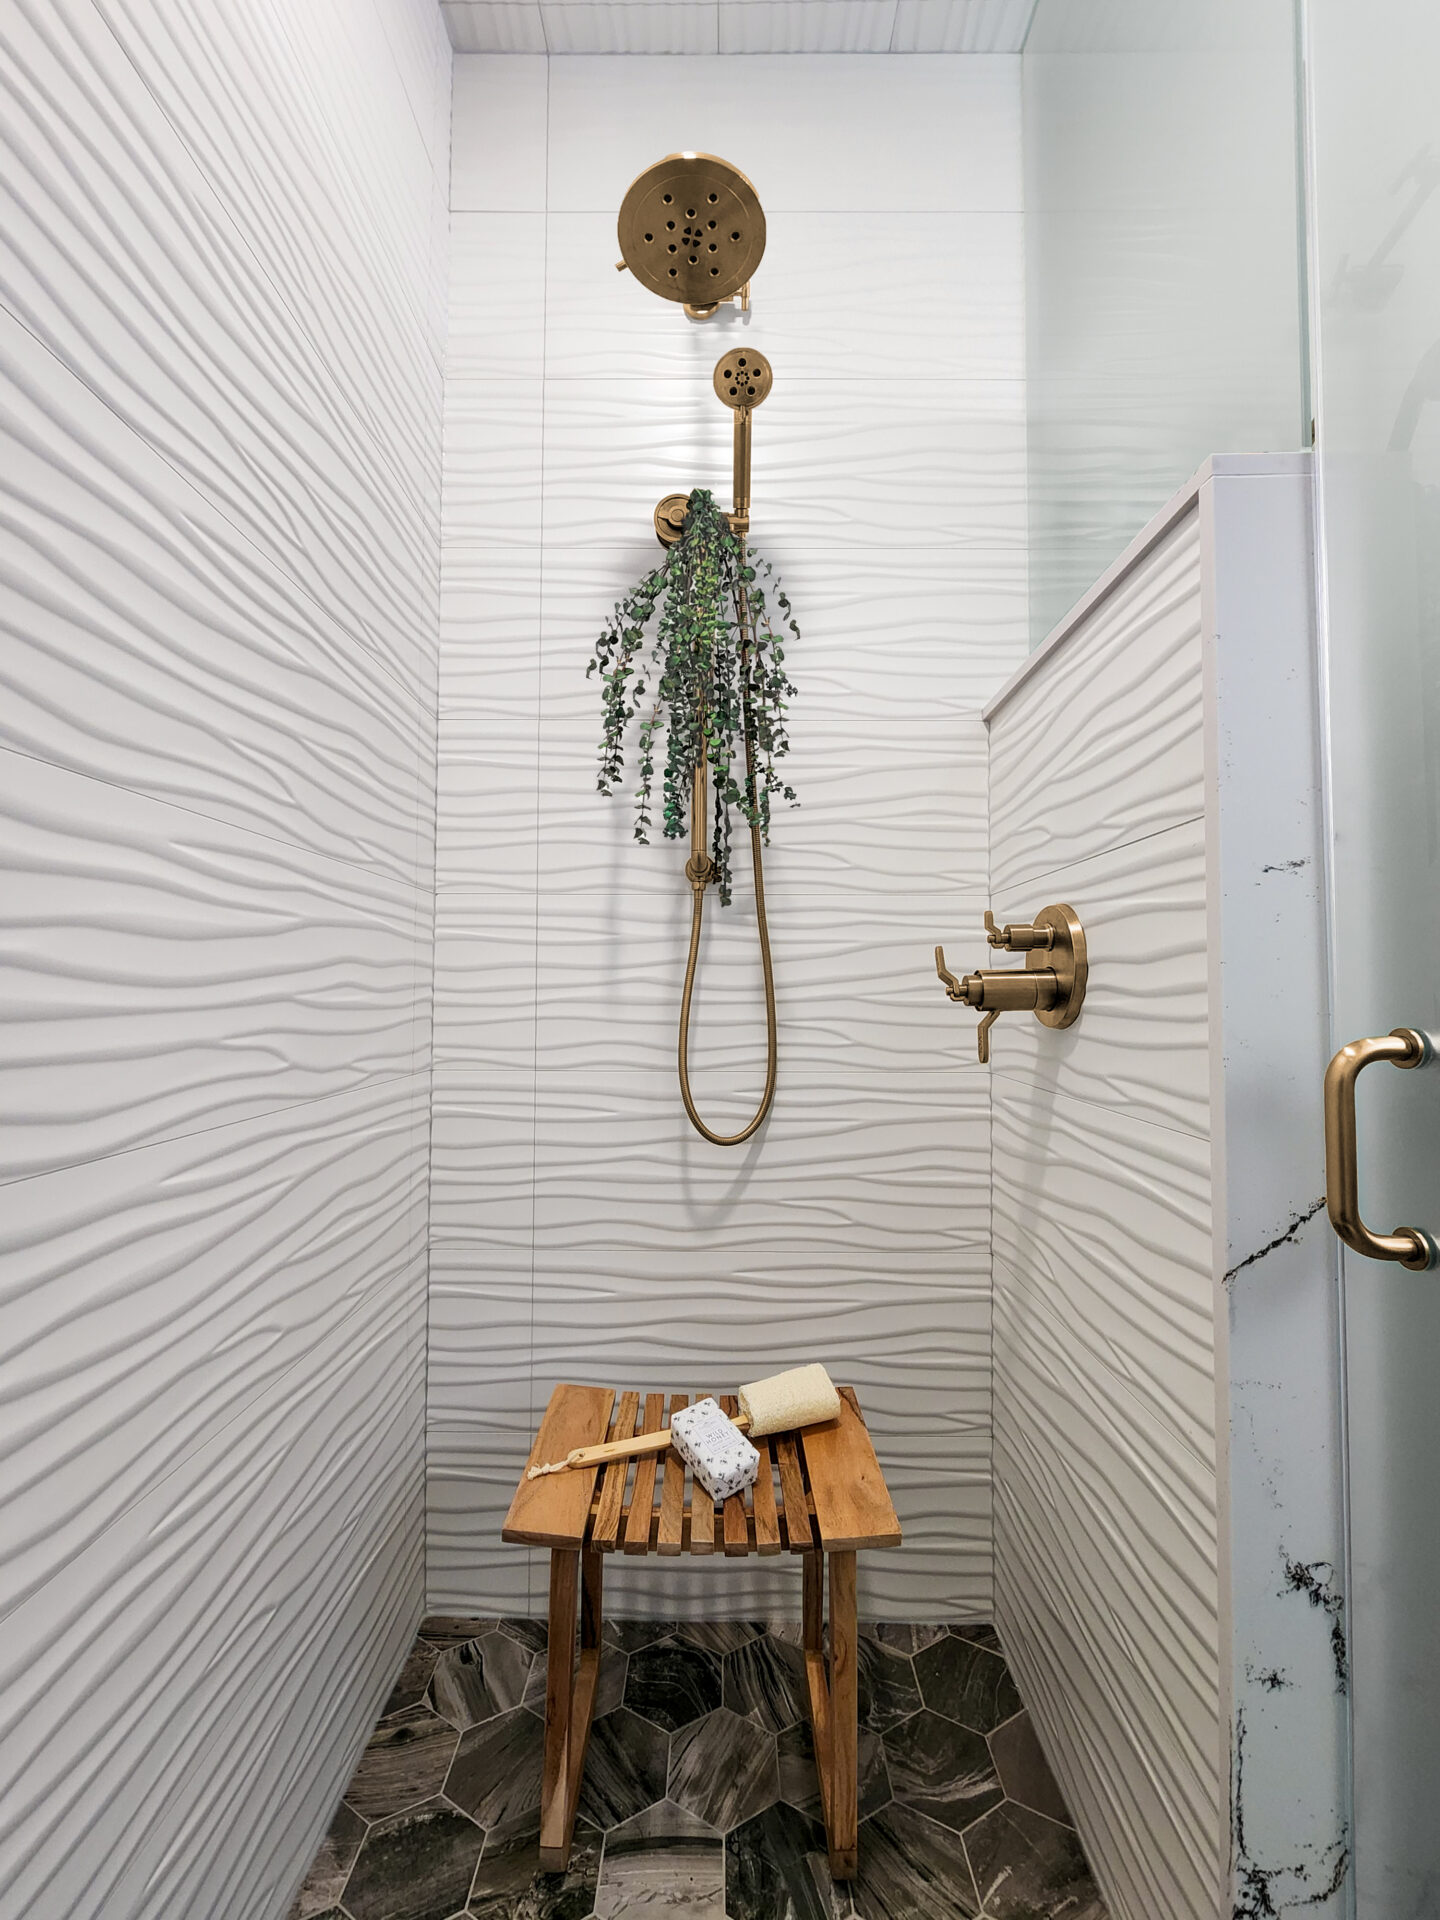 Custom tiled shower with Champagne Bronze fixtures